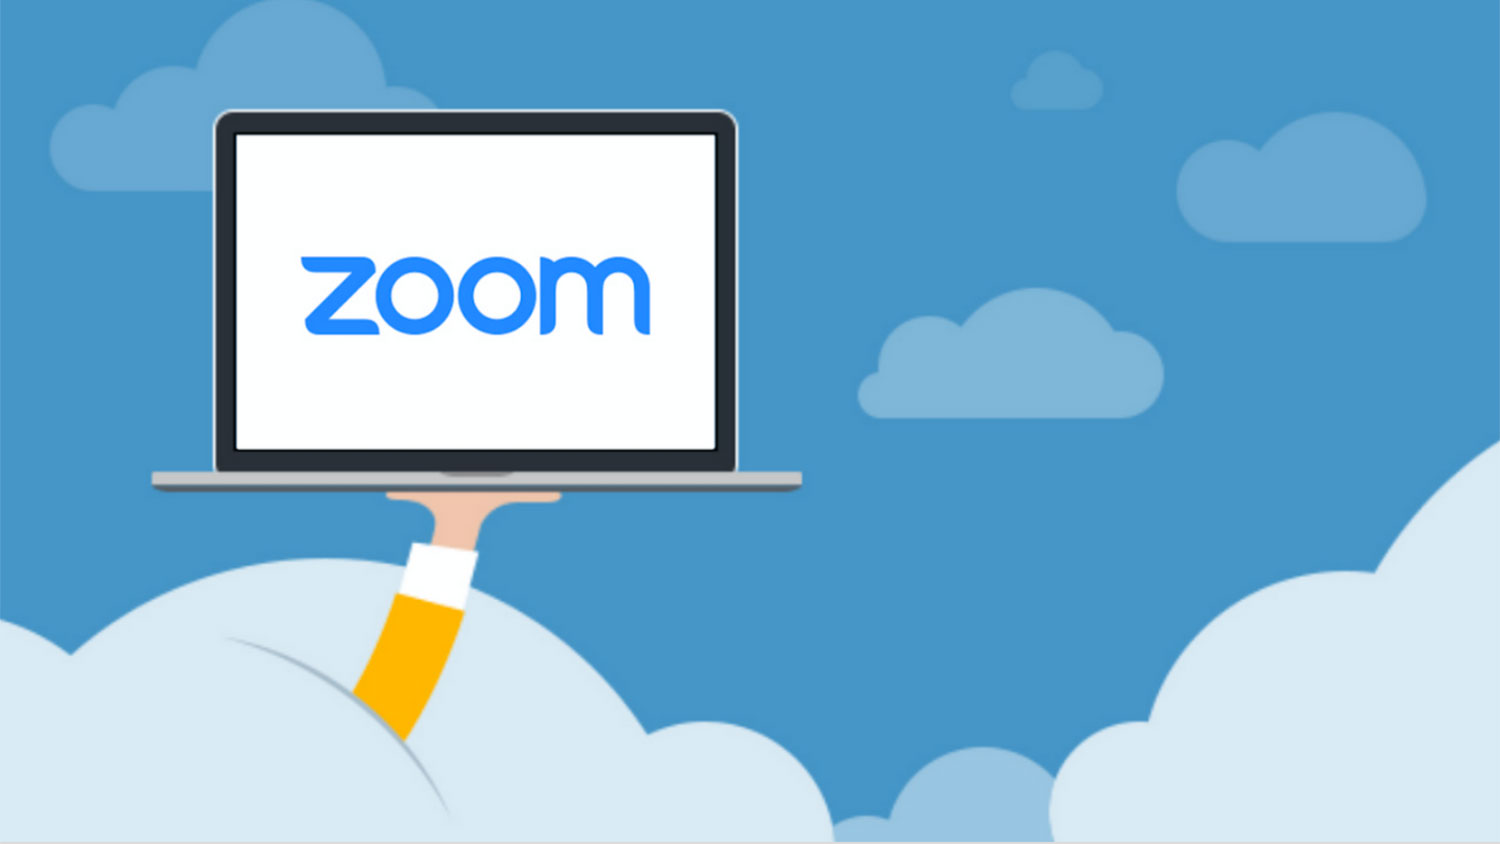 Zoom conferencing tool cartoon of a computer on a cloud